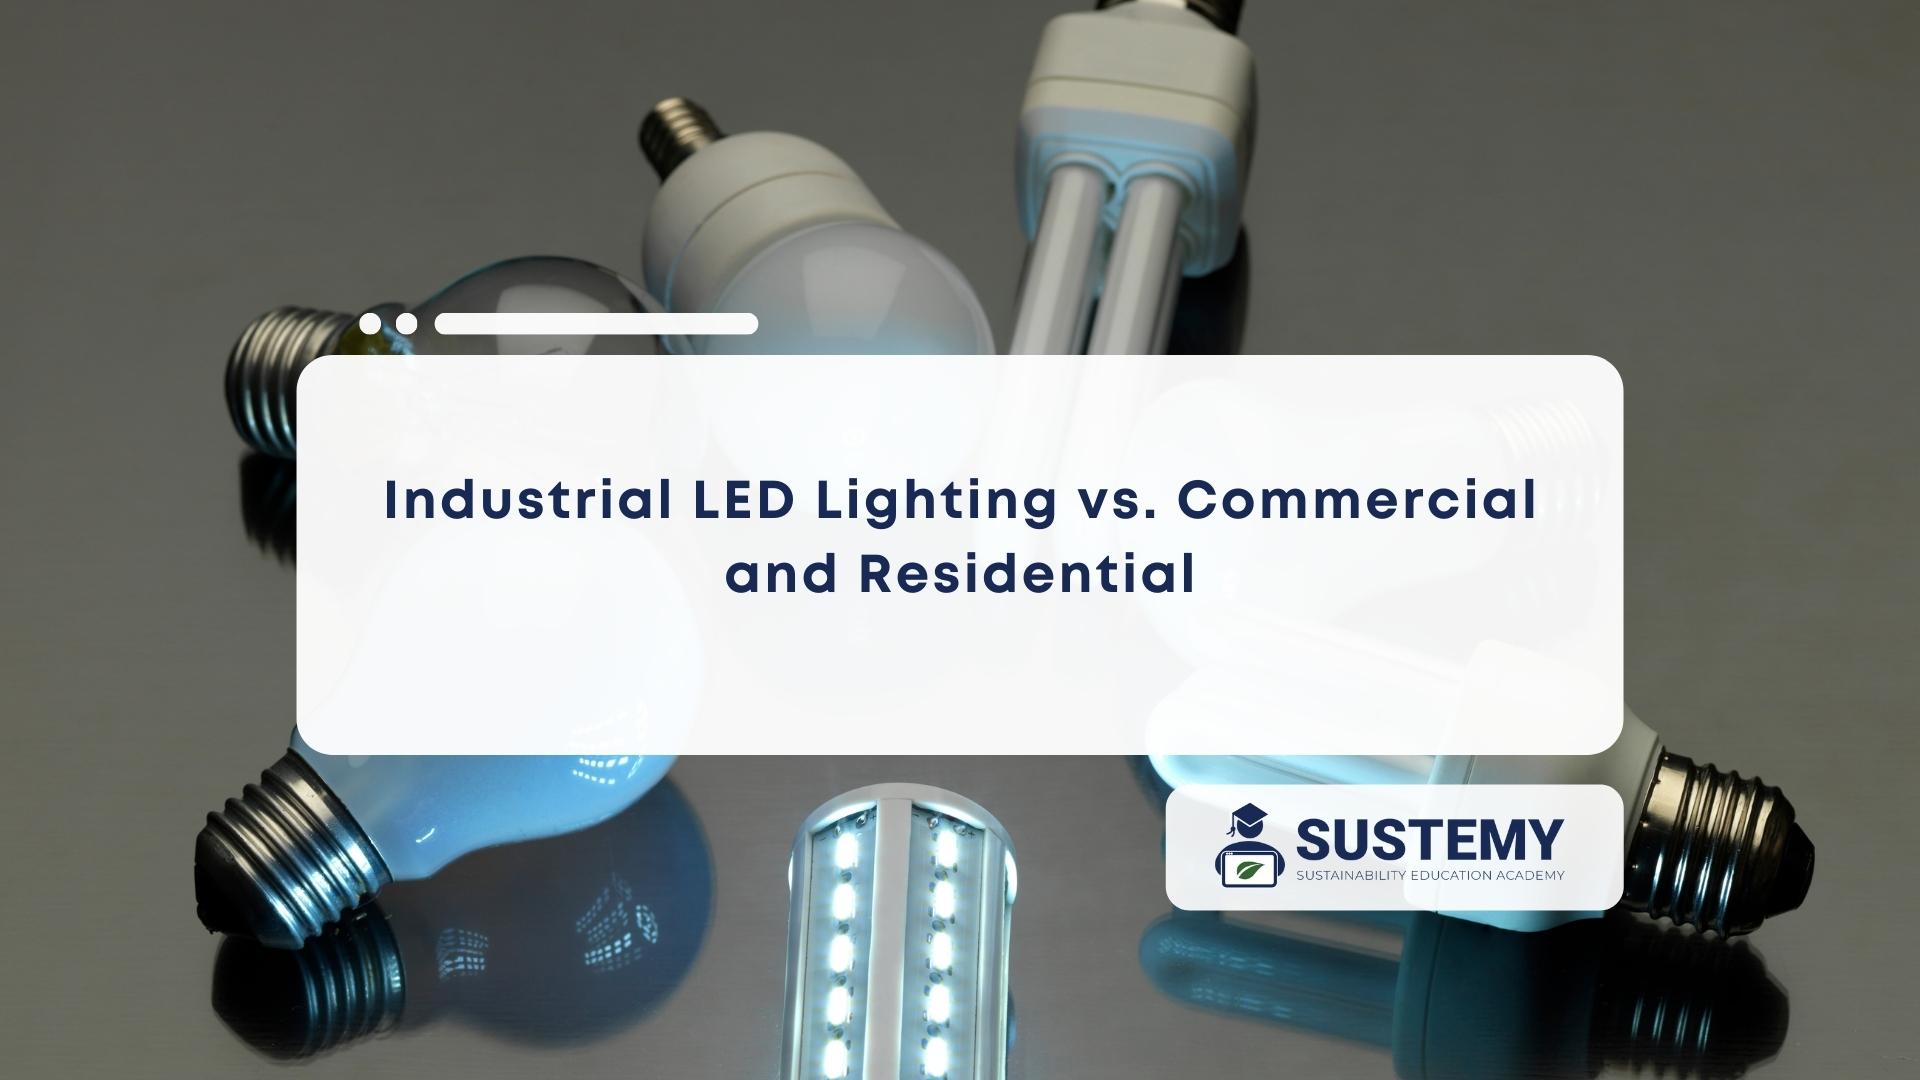 Featured Image of what makes industrial LED lighting different from commercial and residential